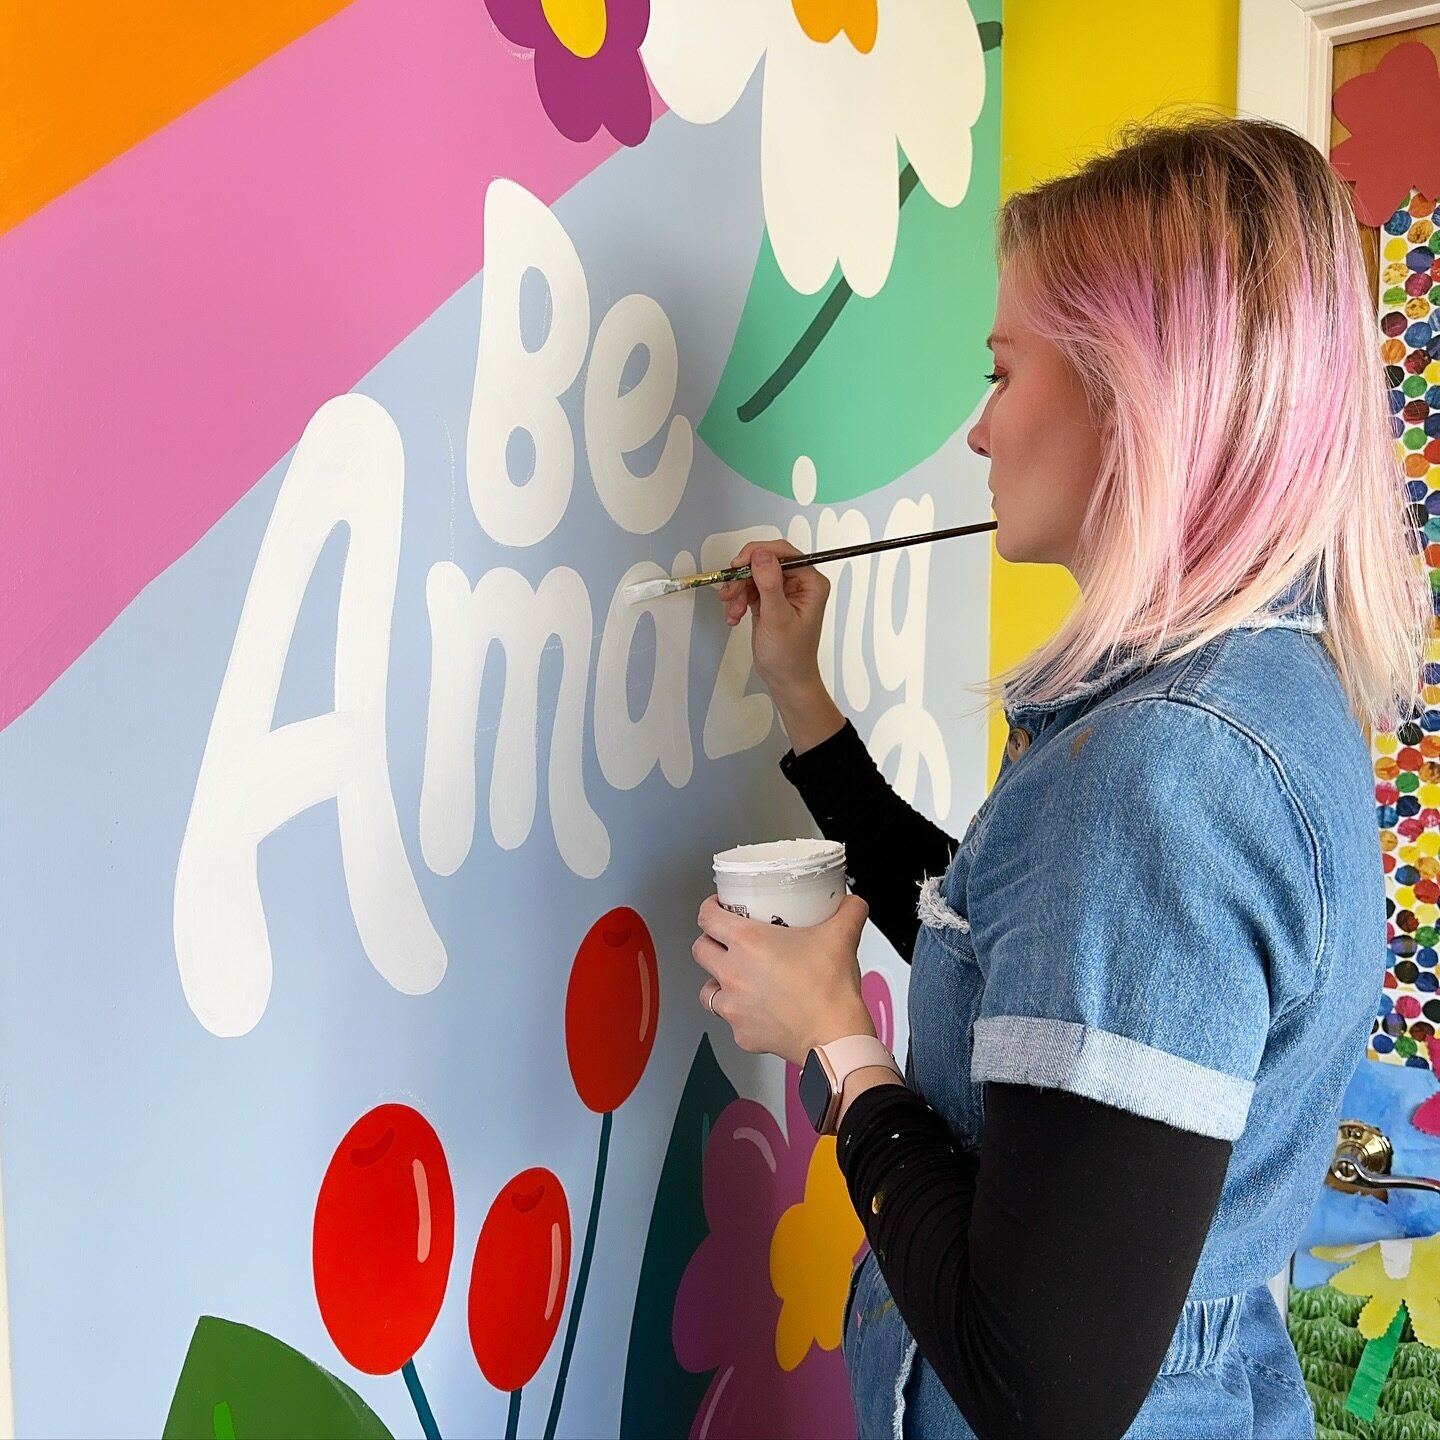 Just wrapped up my 3 murals at Creative Kids Academy today and I can&rsquo;t wait to share the process behind them all! It was such a blast working in this space and meeting all of the kiddos. The murals came out so fun and colorful, such a huge tran